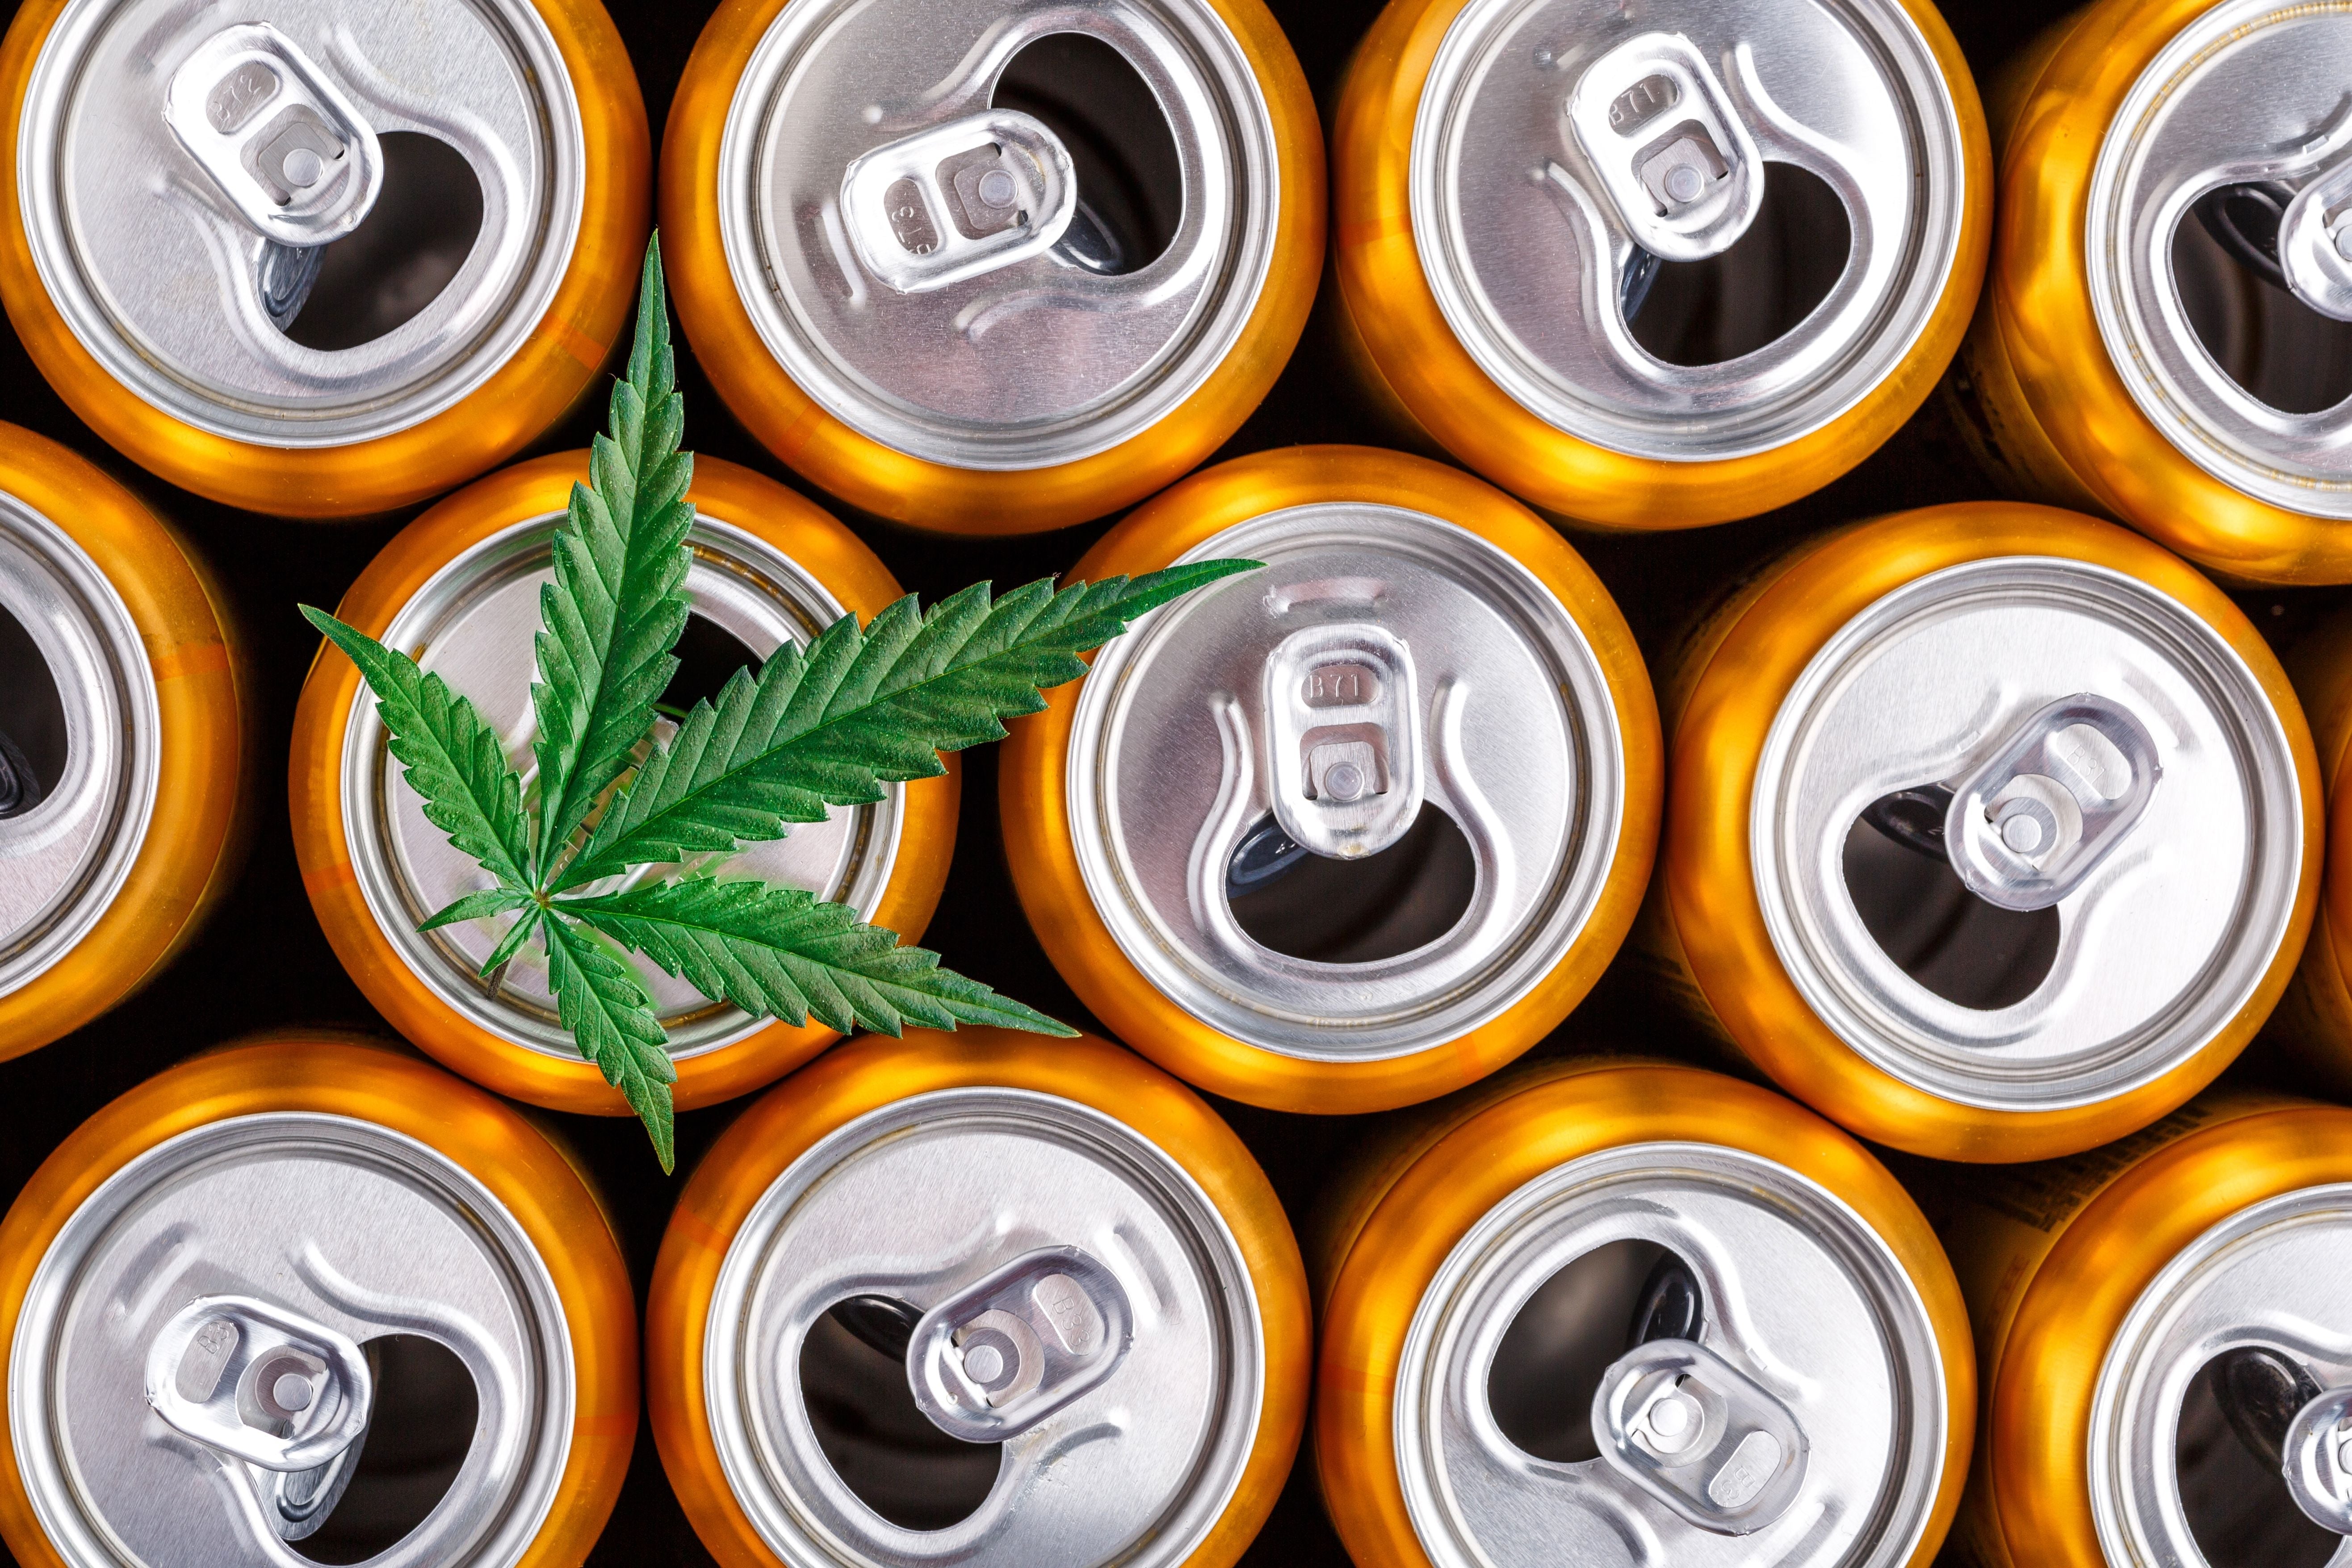 PepsiCo launches new Rockstar energy drink made with hemp seed extract